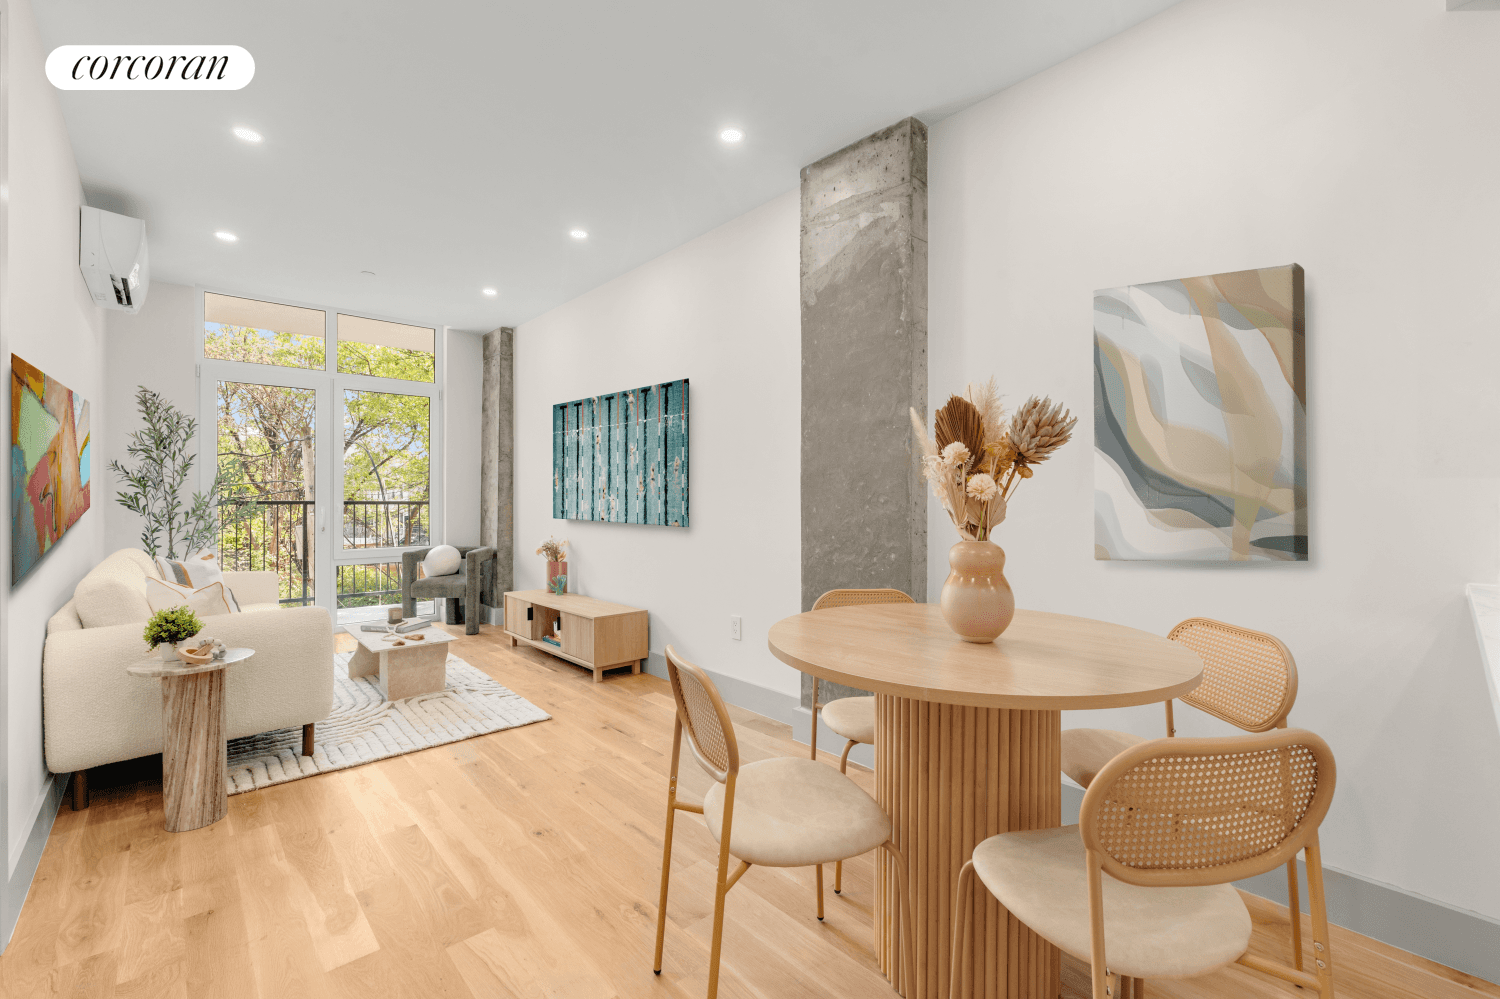 Meet 1155 Bedford Avenue, a thoughtfully designed modern condominium building in prime Bedford Stuyvesant.